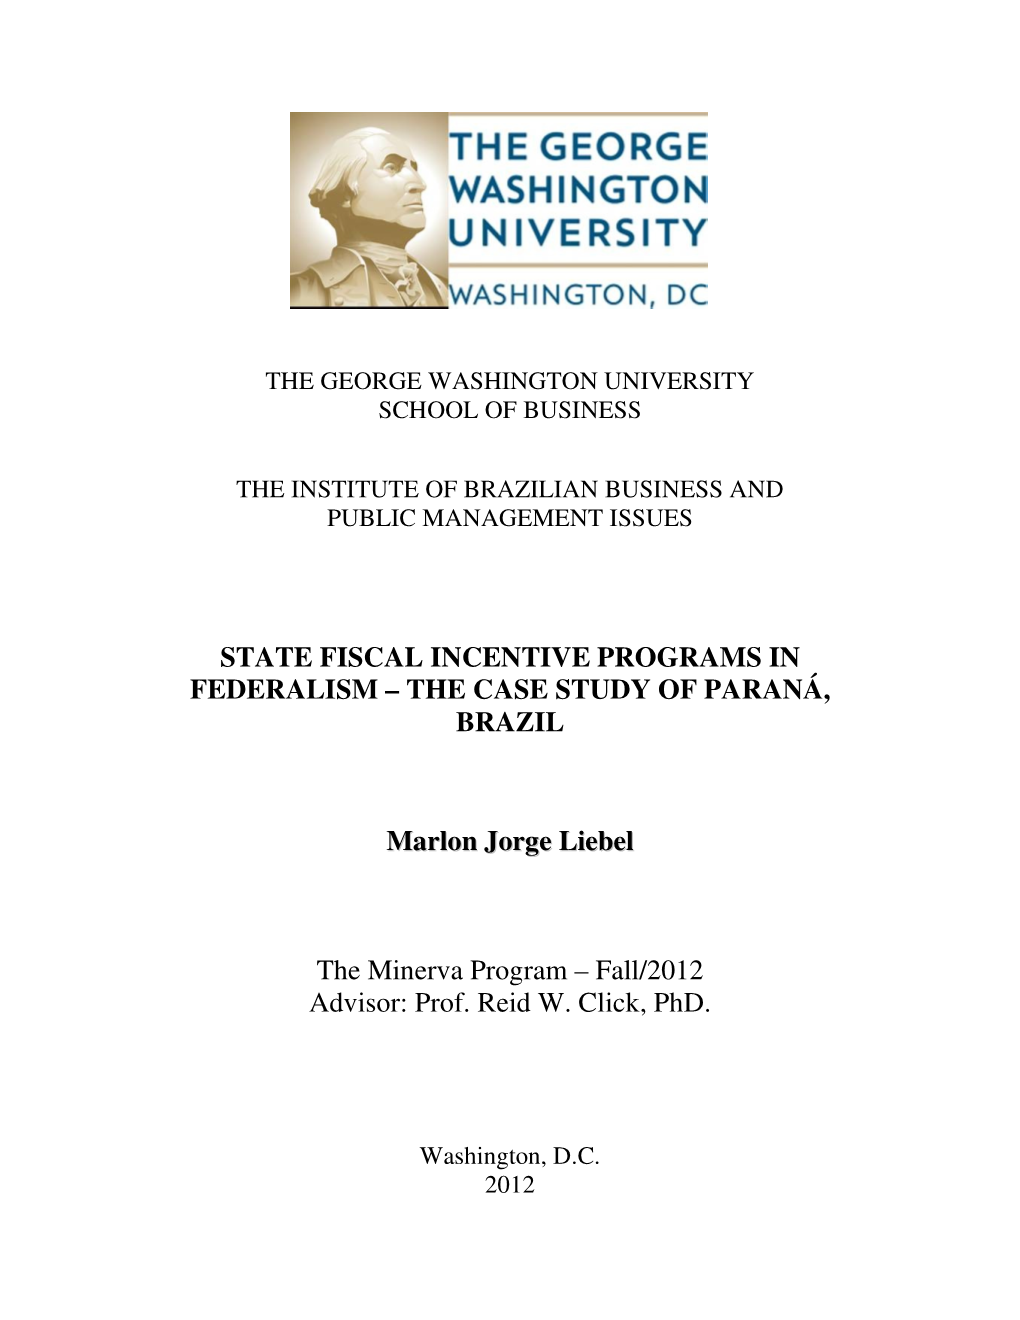 State Fiscal Incentive Programs in Federalism – the Case Study of Paraná, Brazil